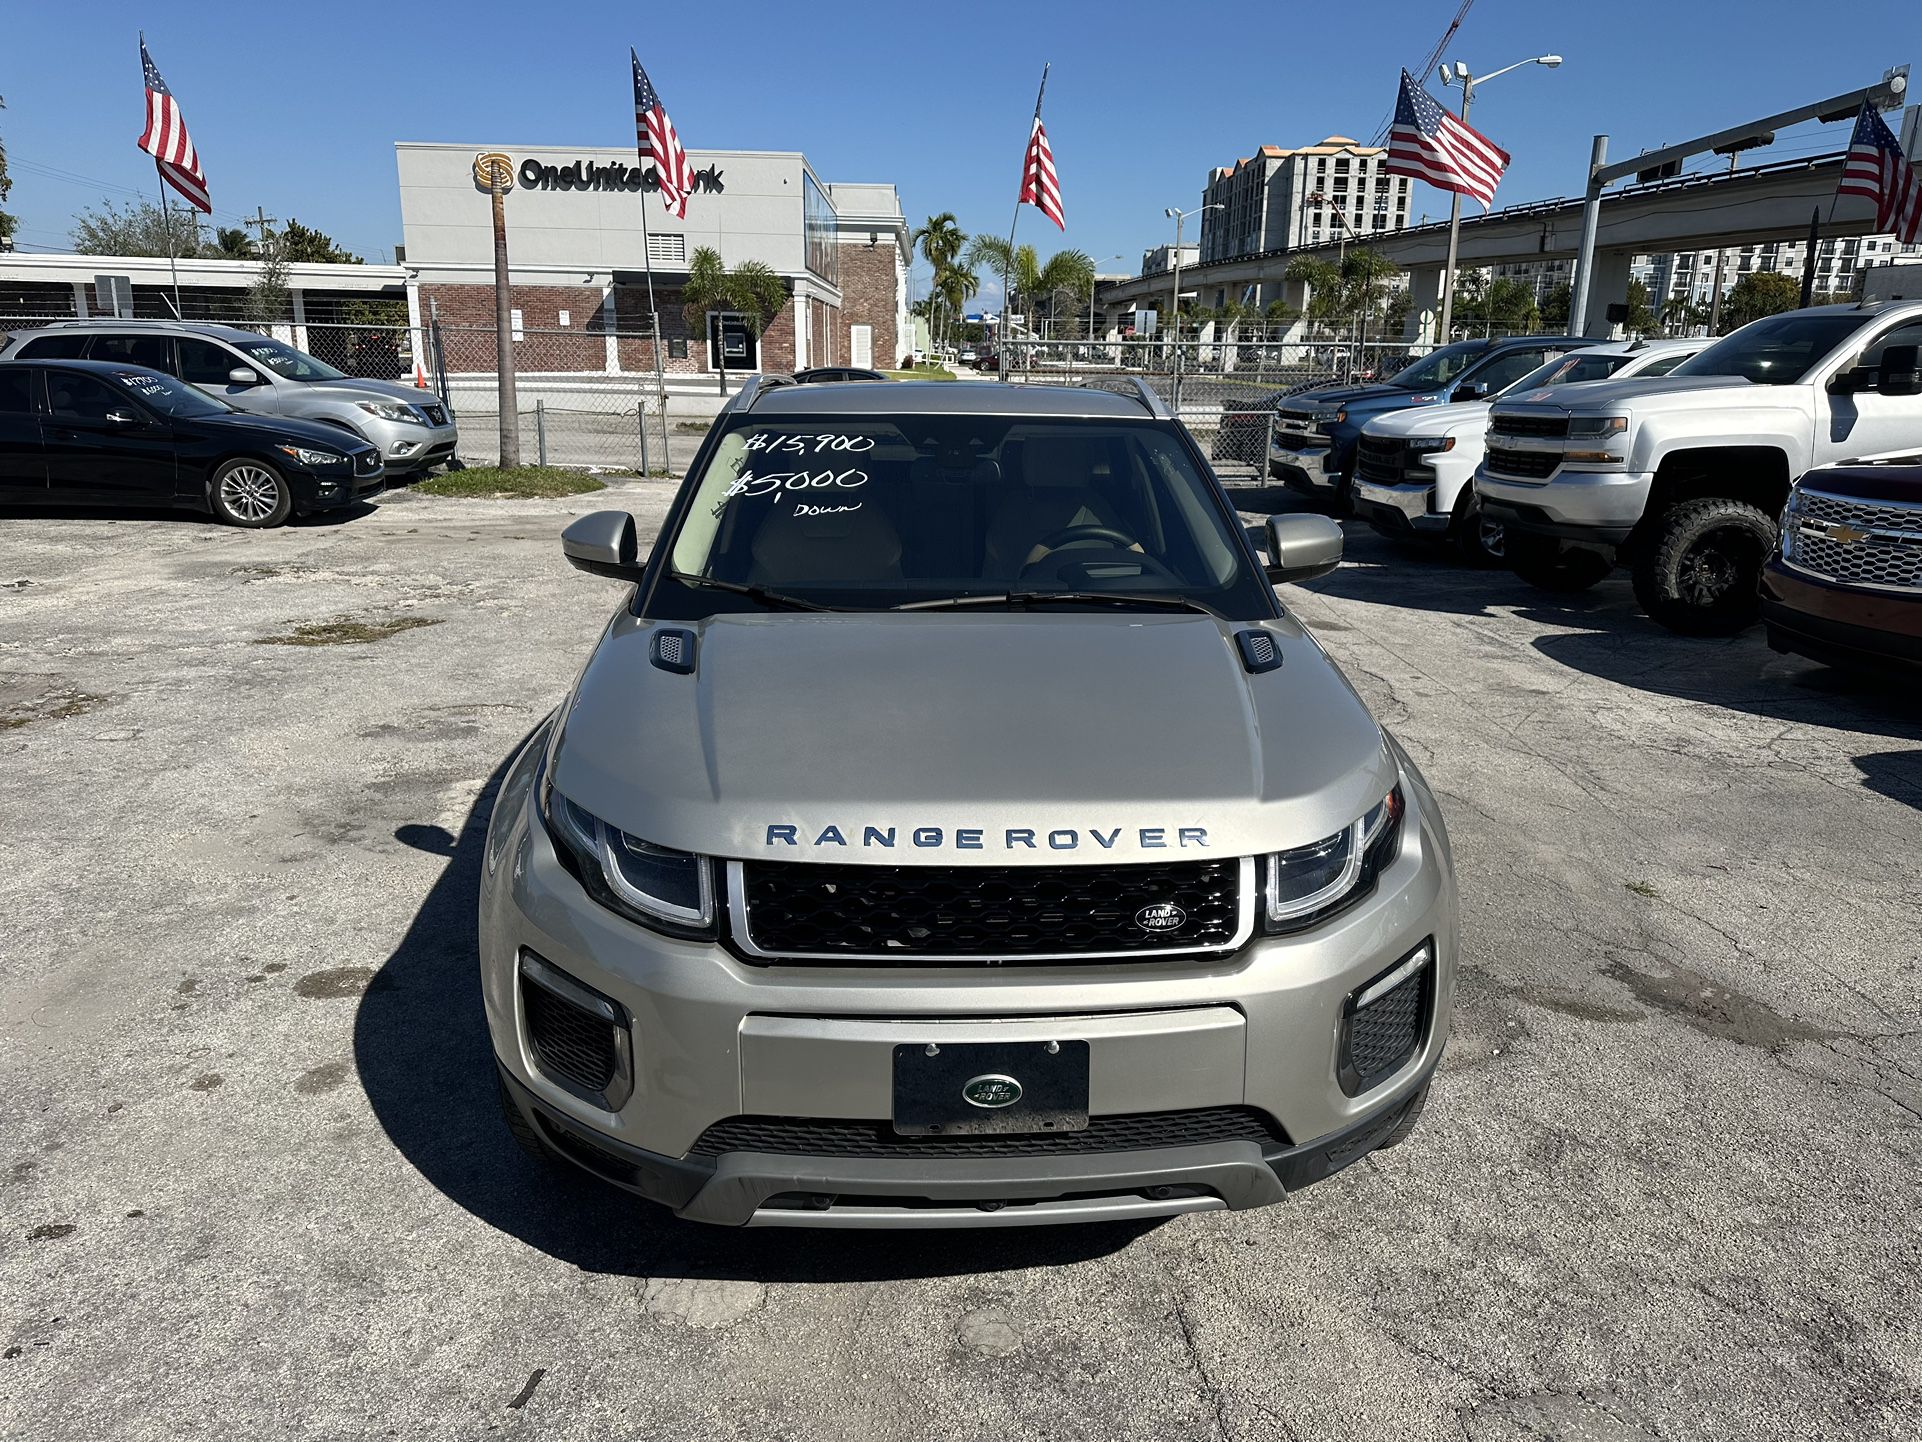 used 2017 Land Rover evoque - front view 1